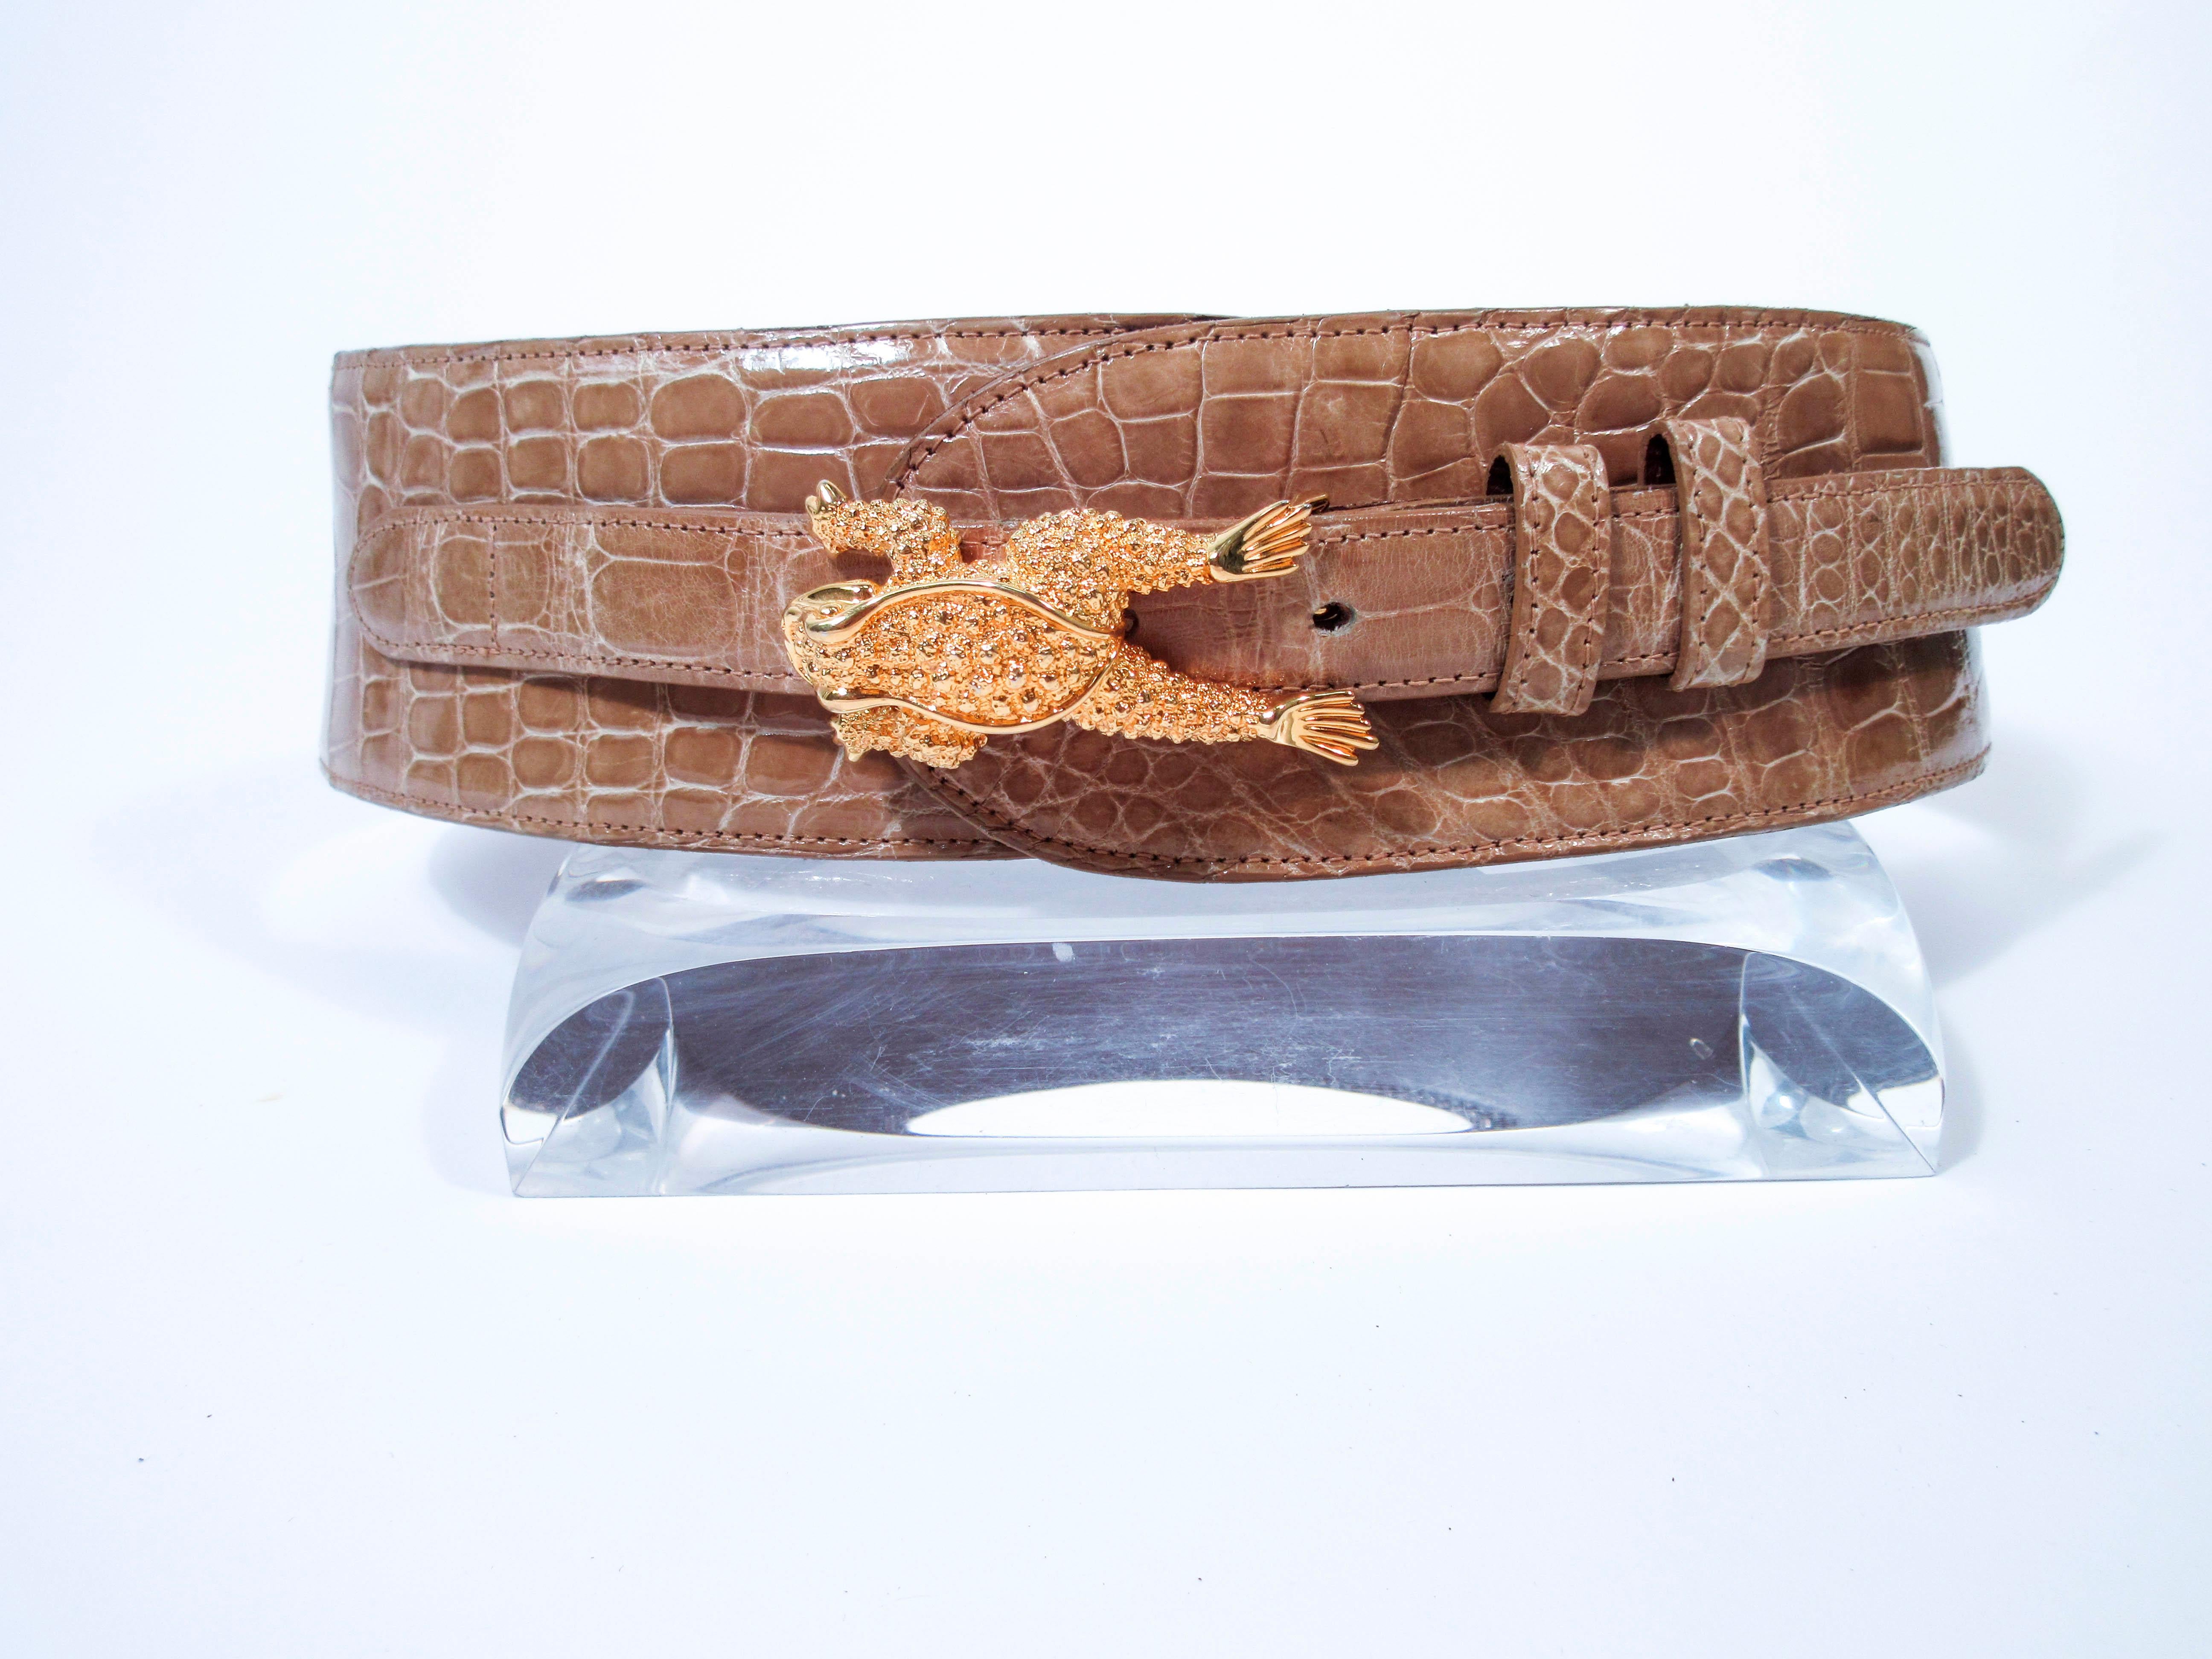 This vintage Barry Kiselstein-Cord belt is composed of a nude alligator with gold-tone sterling silver hardware. Features a frog buckle with adjustable belt tab. This is a fantastic statement piece and excellent addition to any collectors wardrobe.